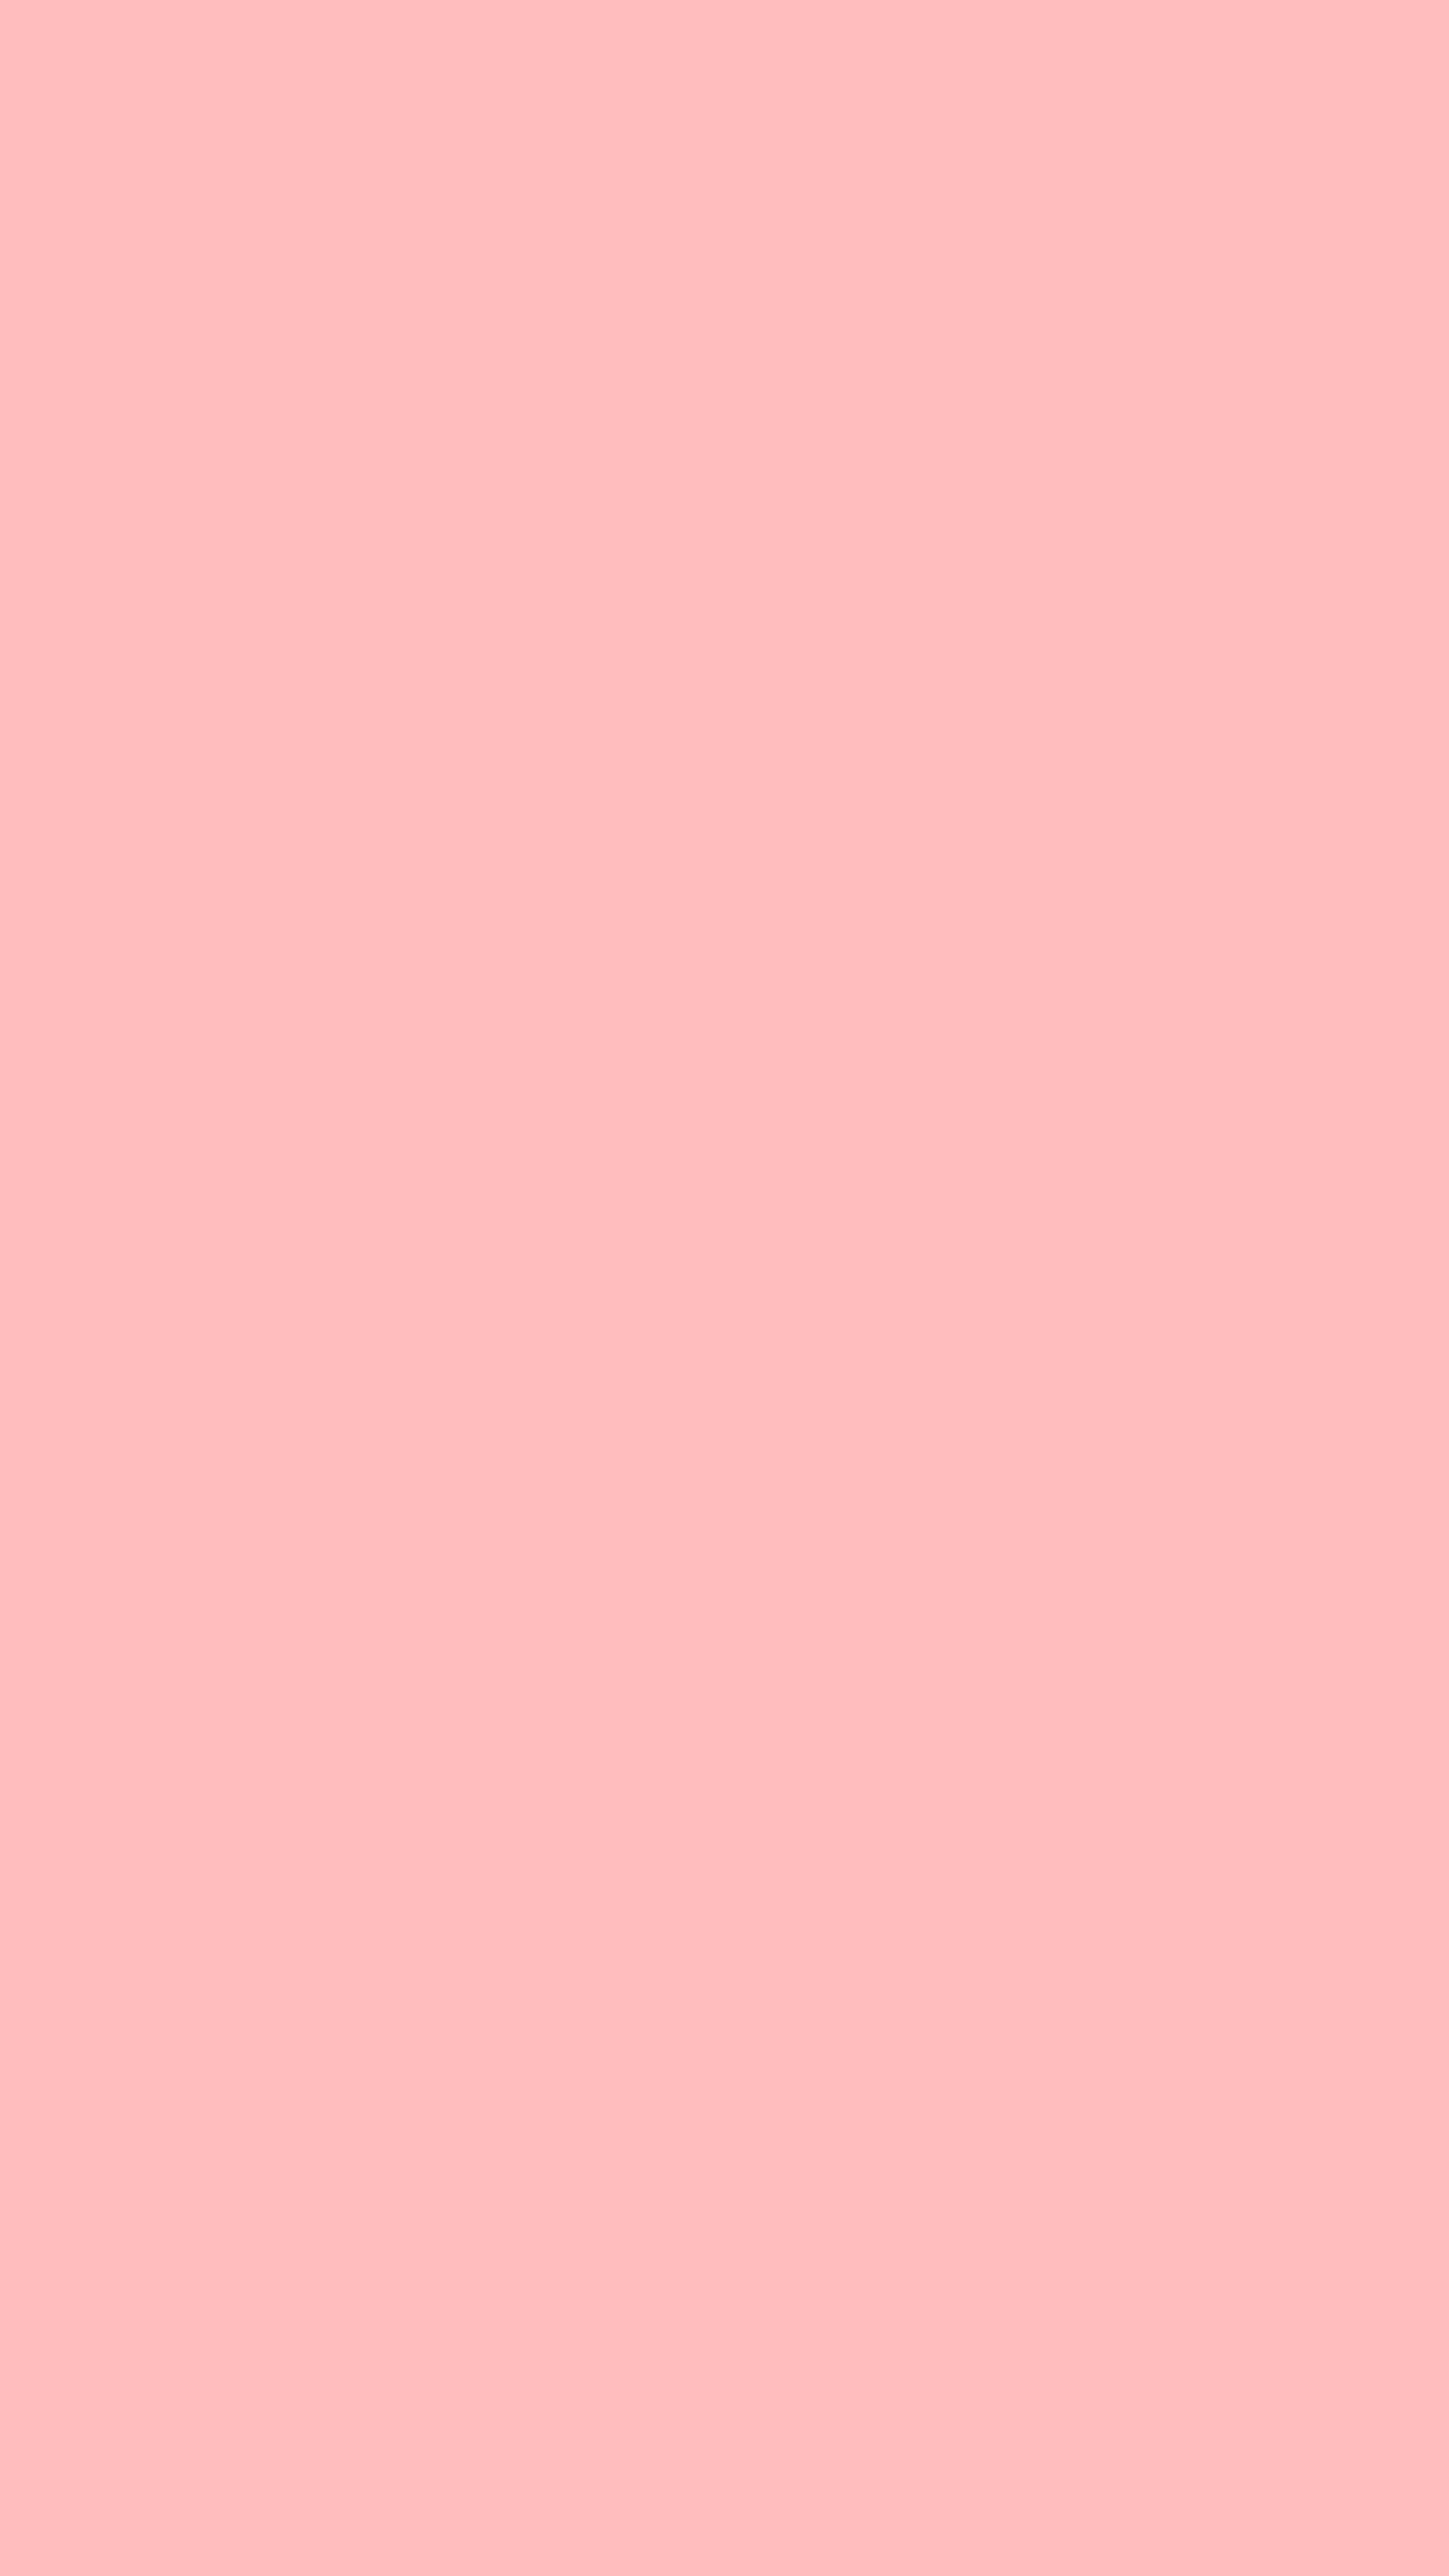 Pretty Pink Plain Color Background Kertas dinding[ae2a355c08f645d5a3f9]